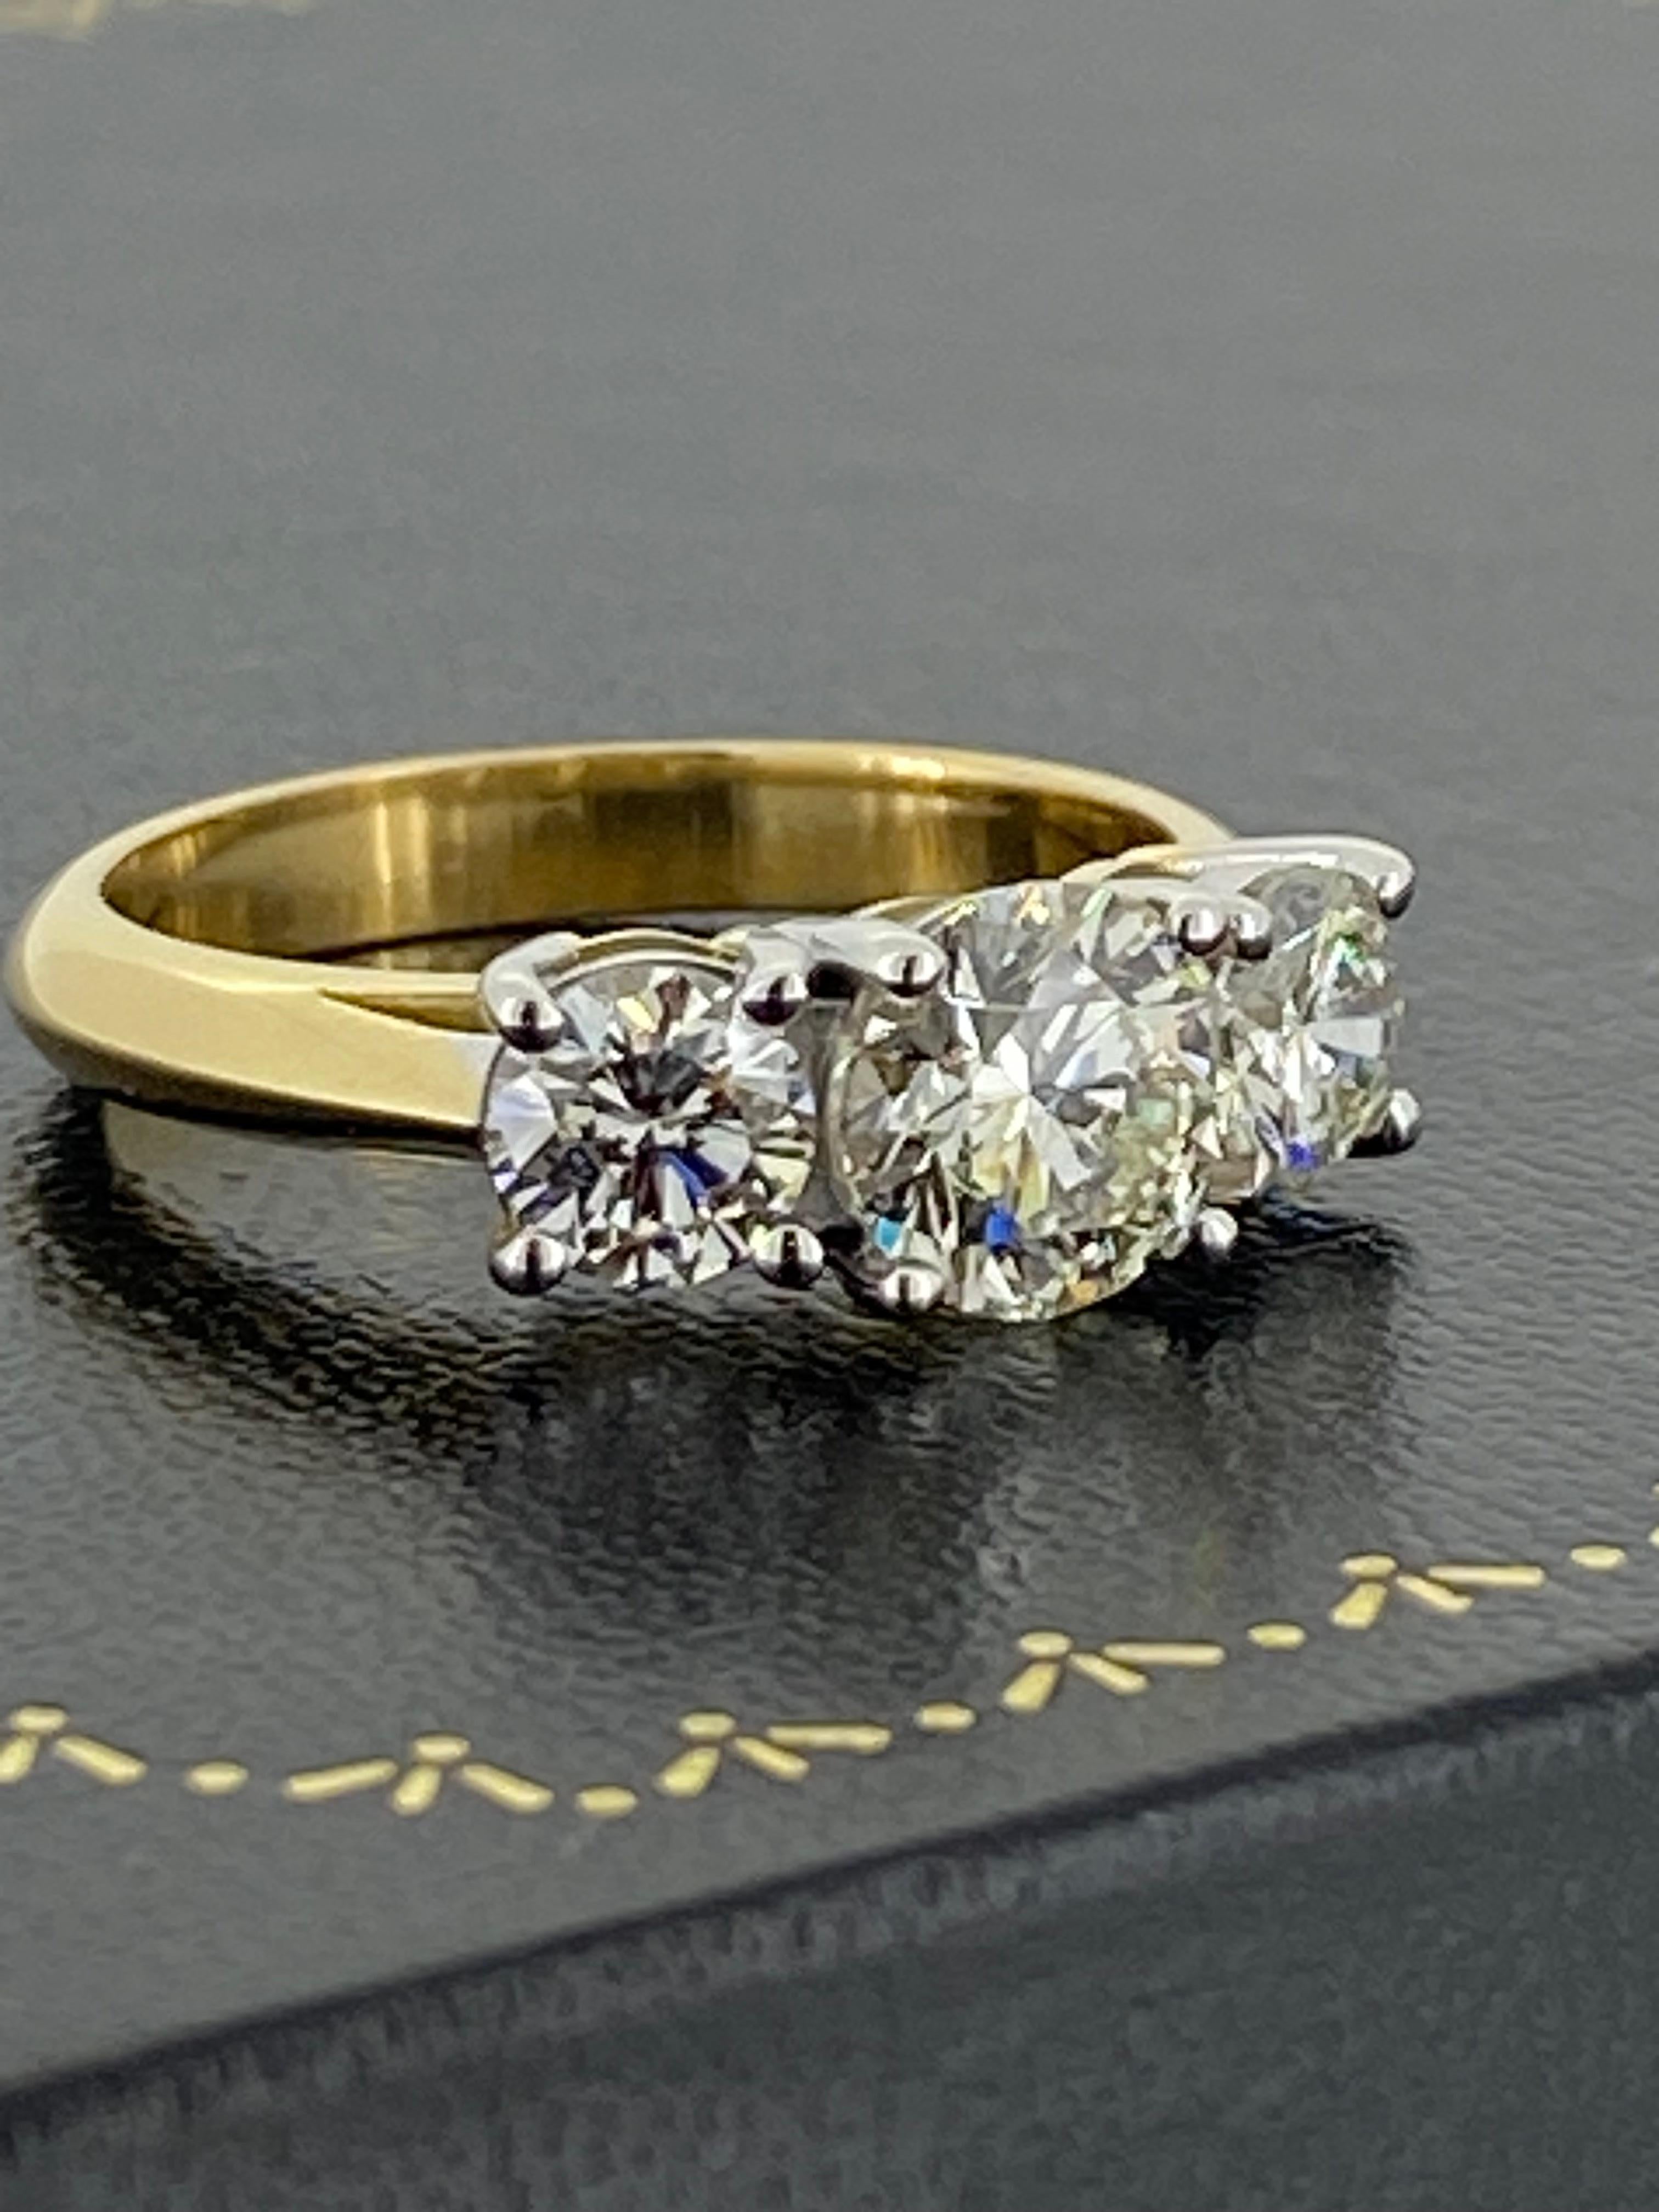 Superb 2.05ct 3-Stone Diamond Ring in 18K Gold. Center stone: 1.05ct, Ideal Cut. For Sale 1